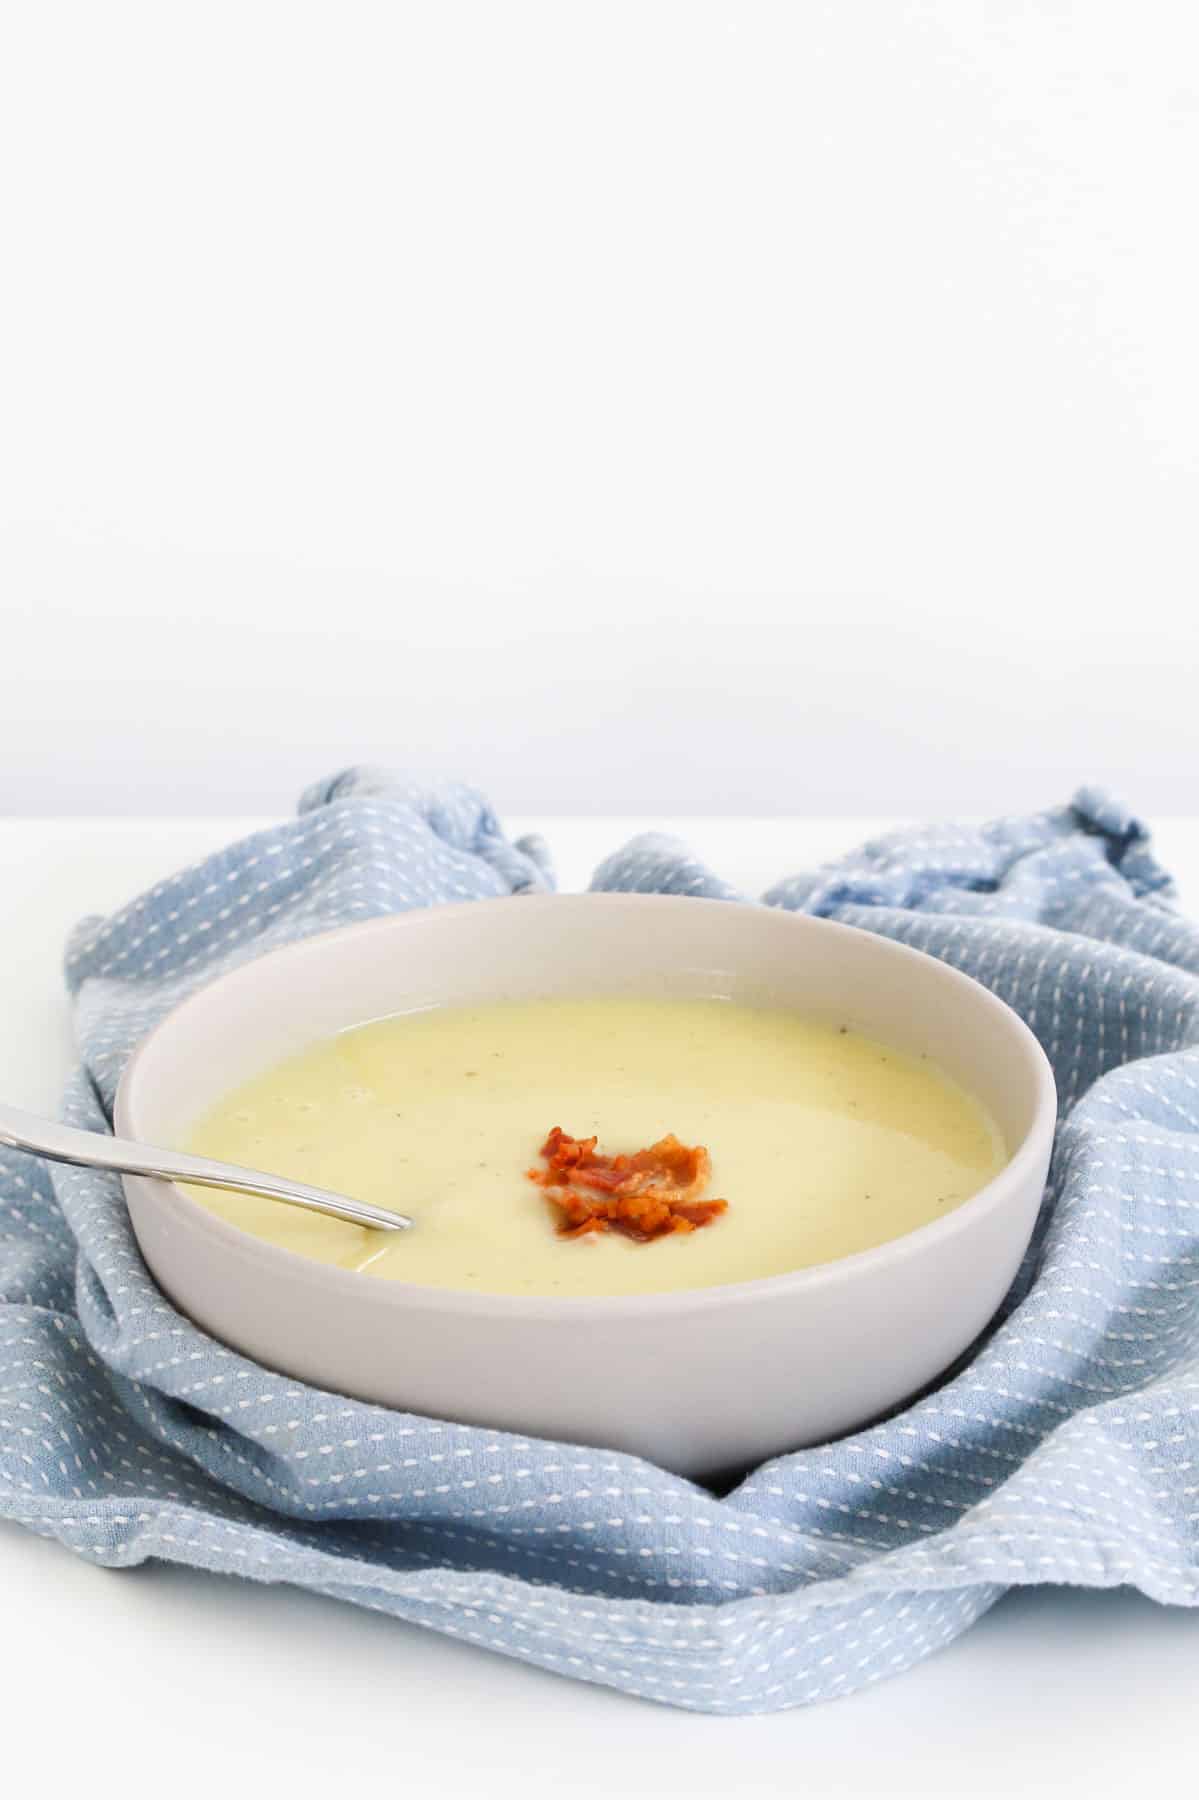 A blue tea towel around a bowl of white soup with bacon.